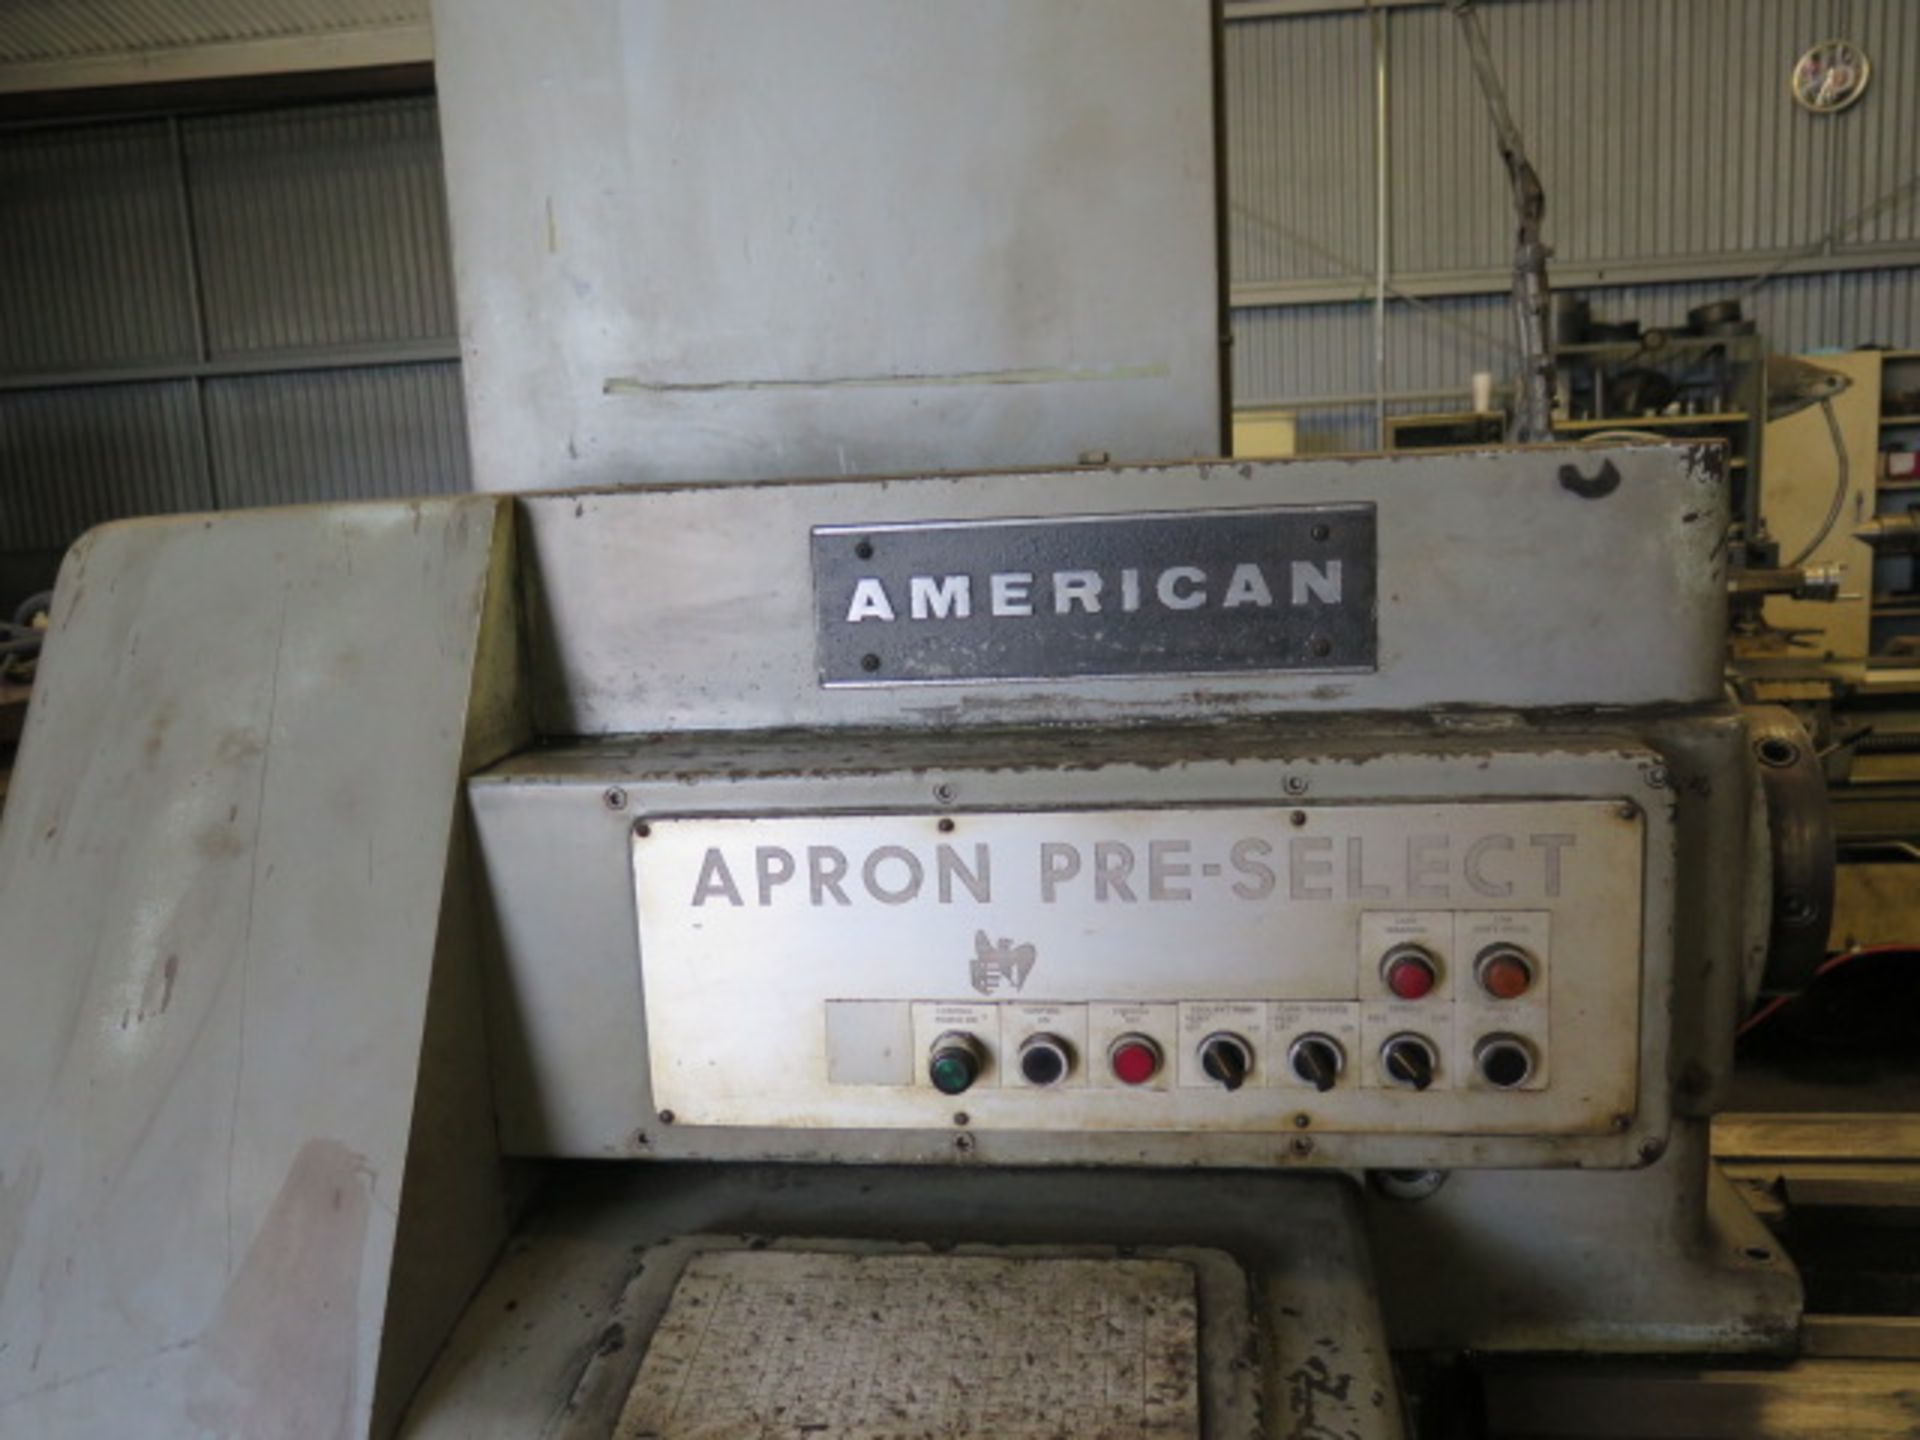 American “Apron Pre-Select” 27” x 120” Lathe w/ Inch Threading, Tailstock, Taper Attach, SOLD AS IS - Image 4 of 15